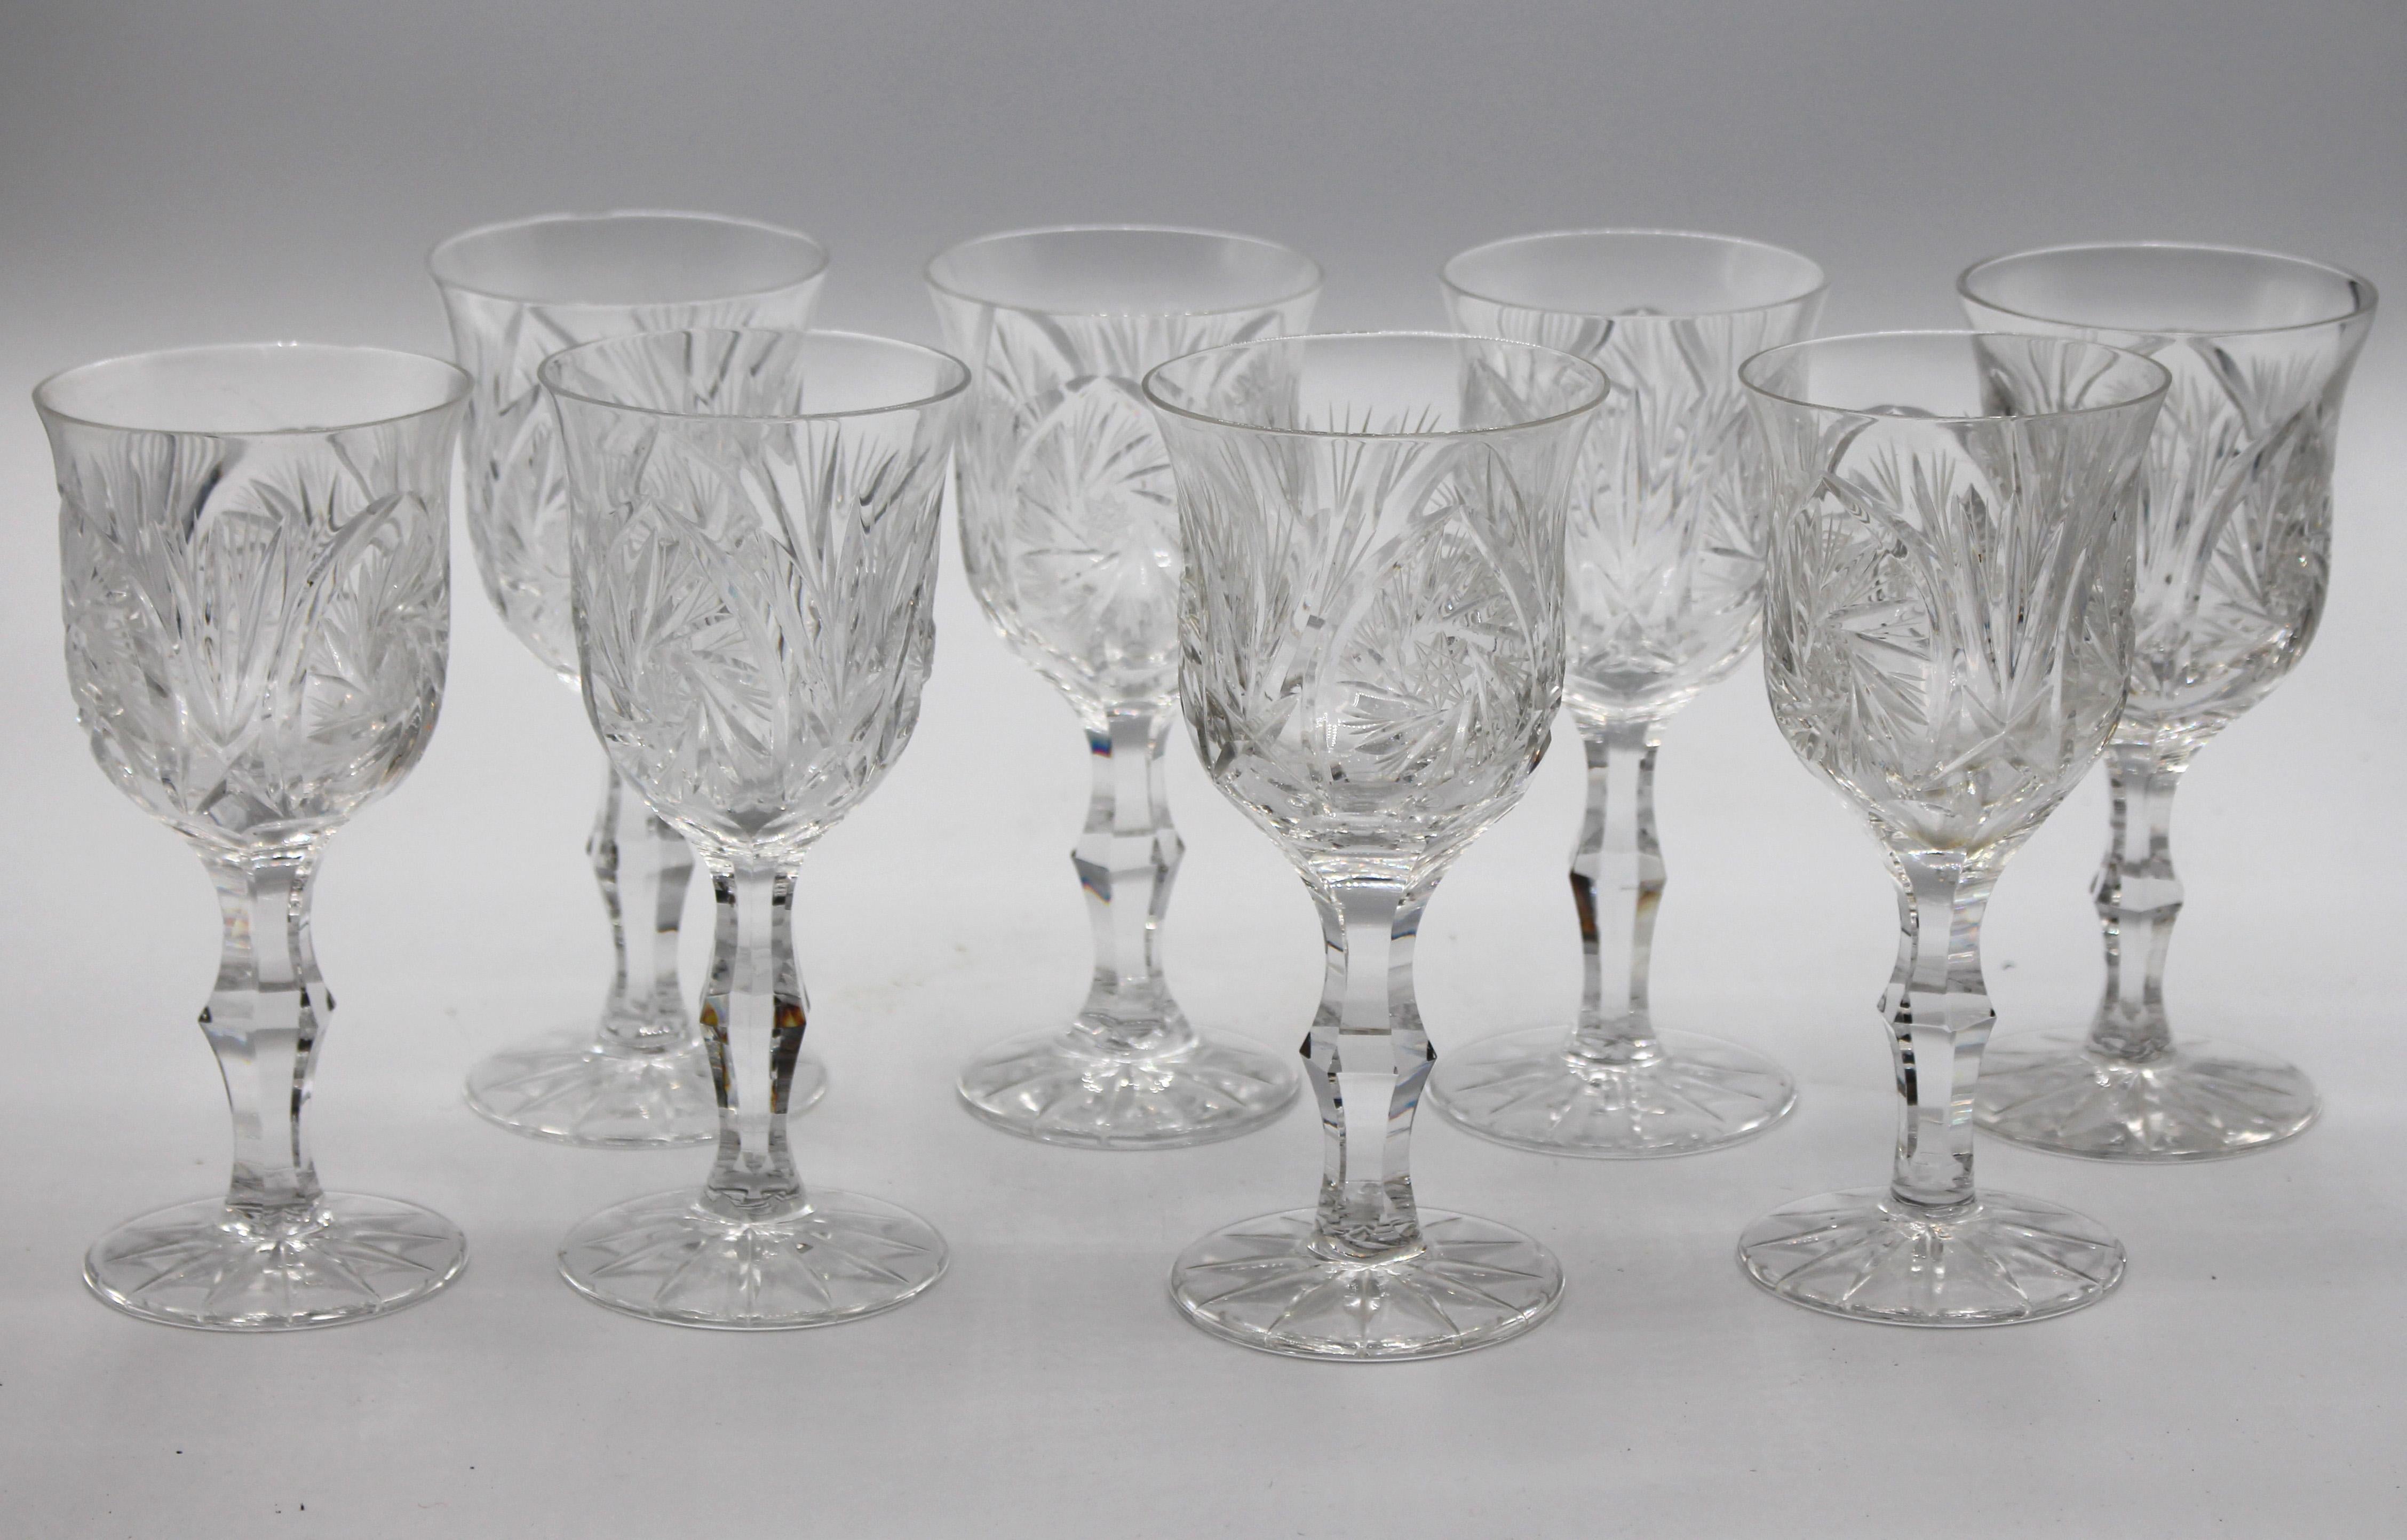 An elegant set of eight wine glasses - tulip form, handblown, American brilliant cut glass. Each raised on shaped and panelled stems. 5 3/4